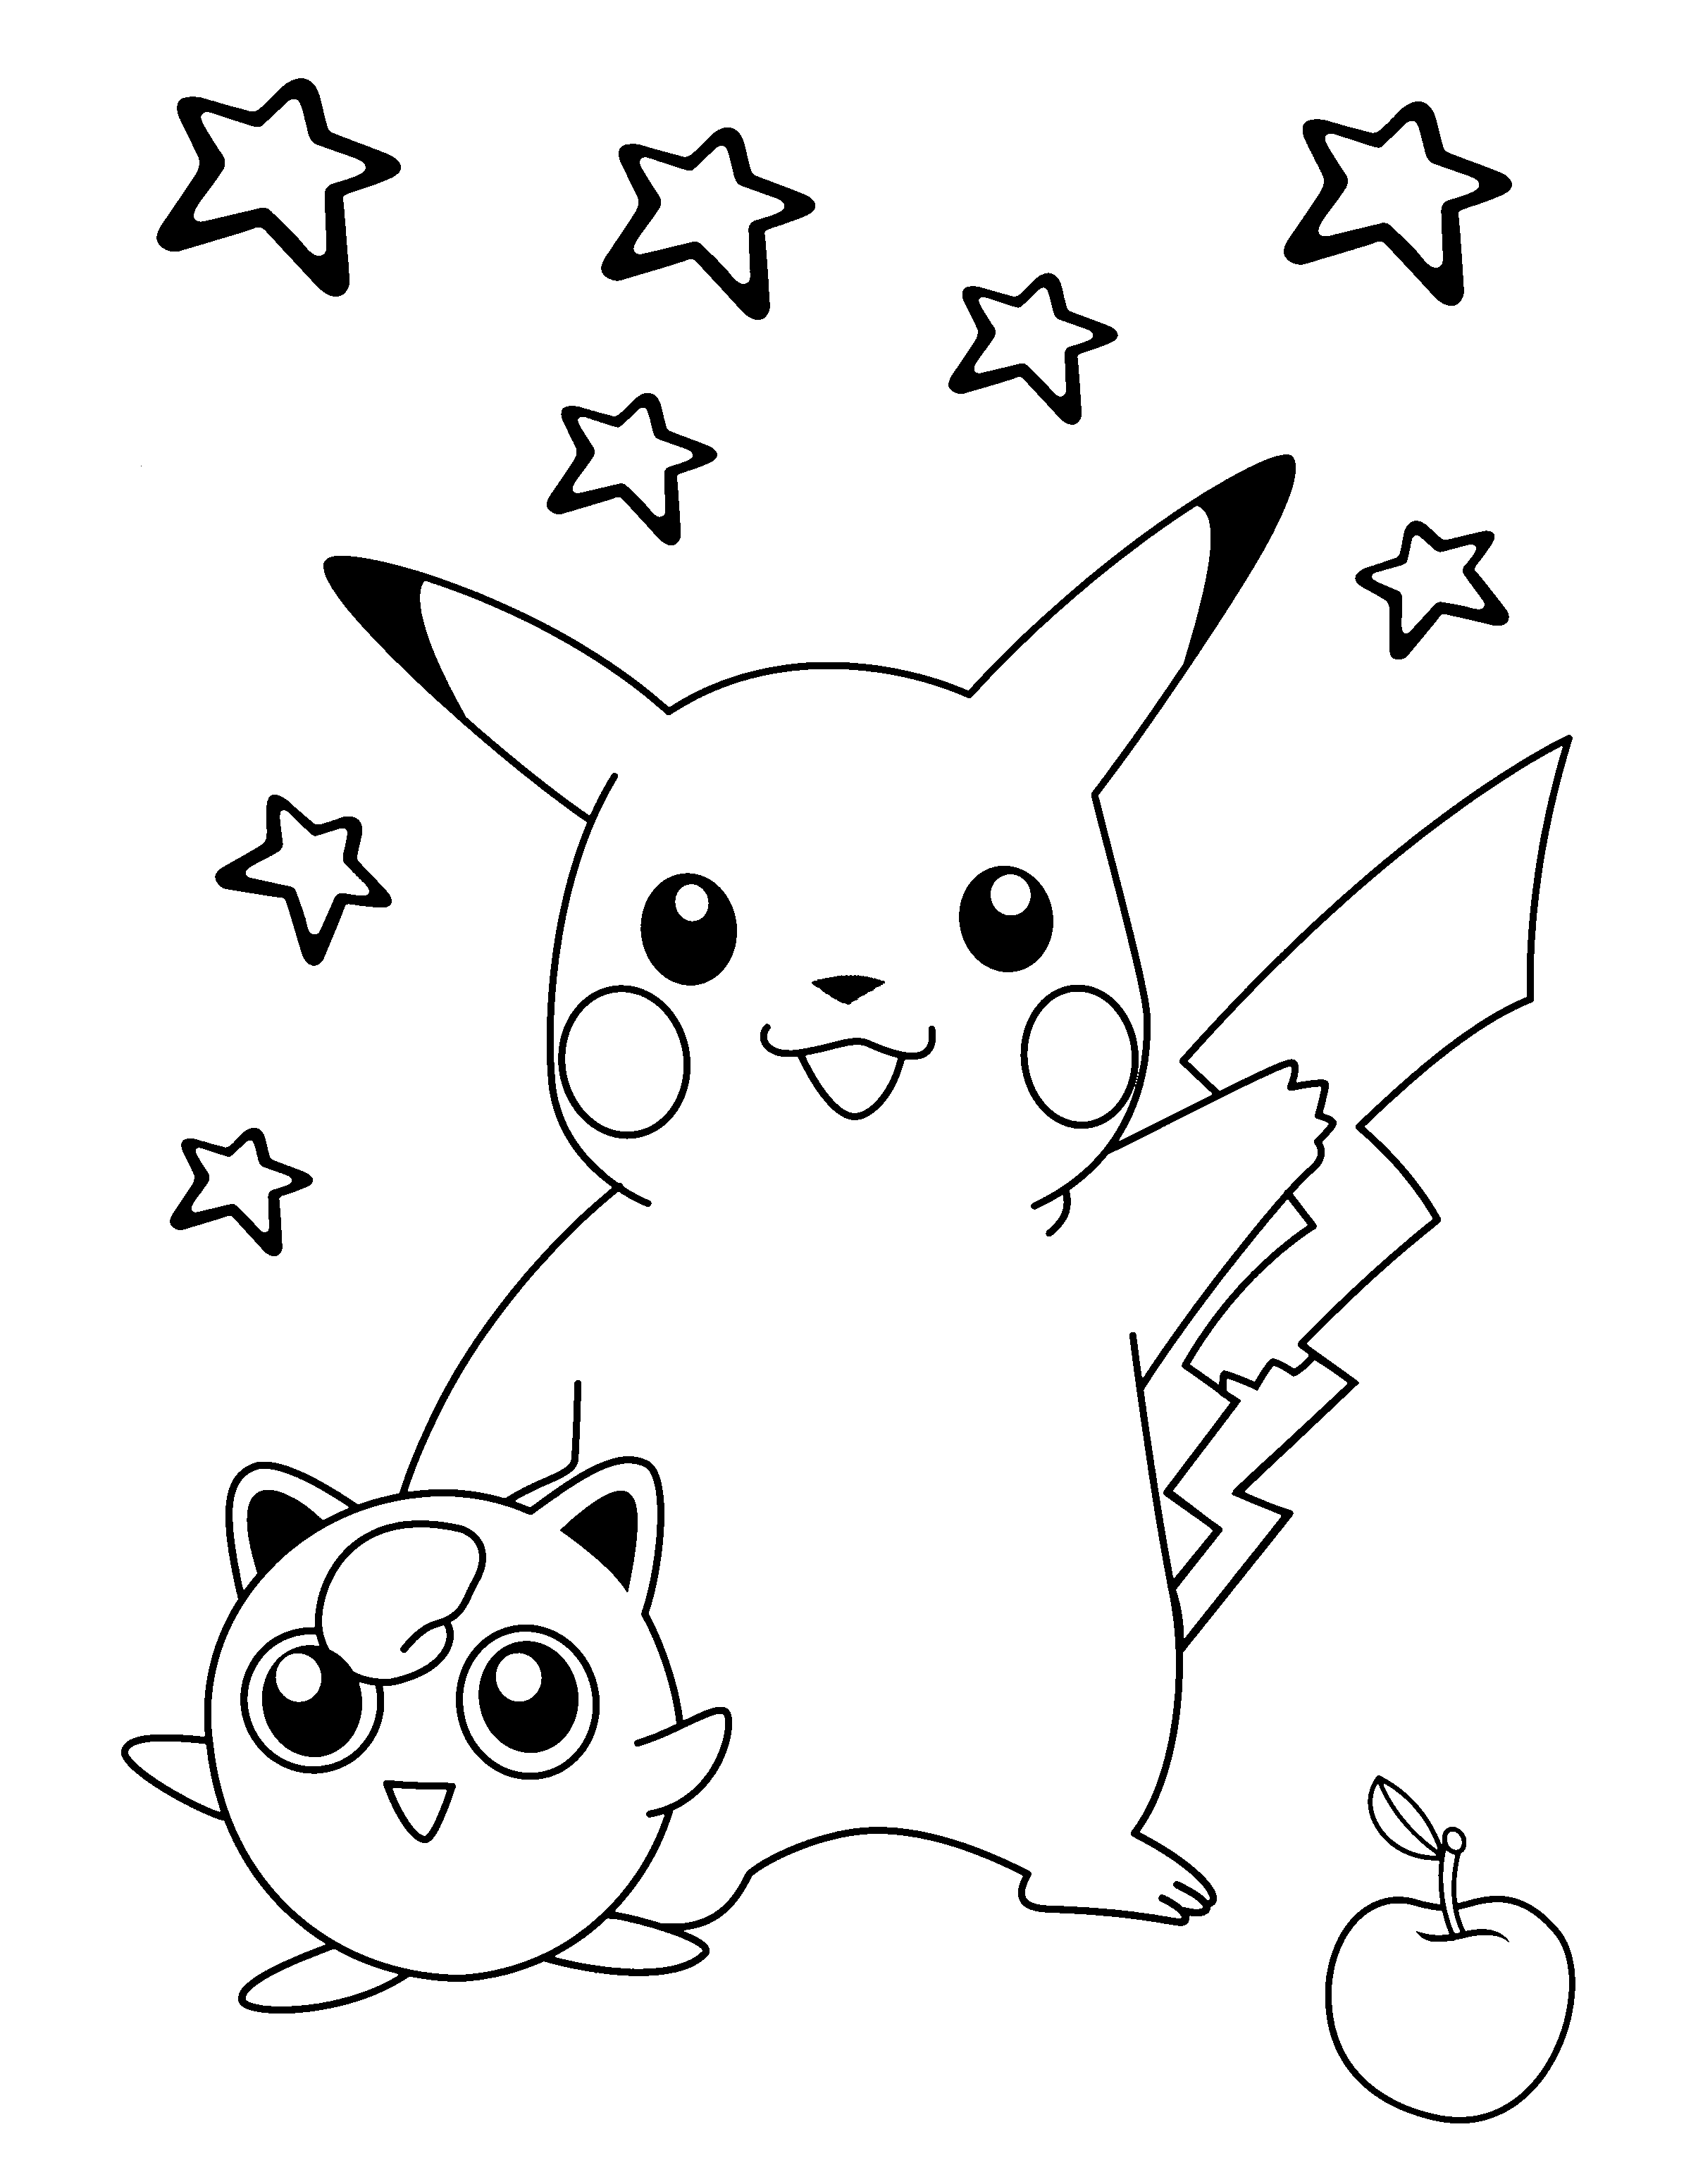 Pokemon coloring page to print and color for free